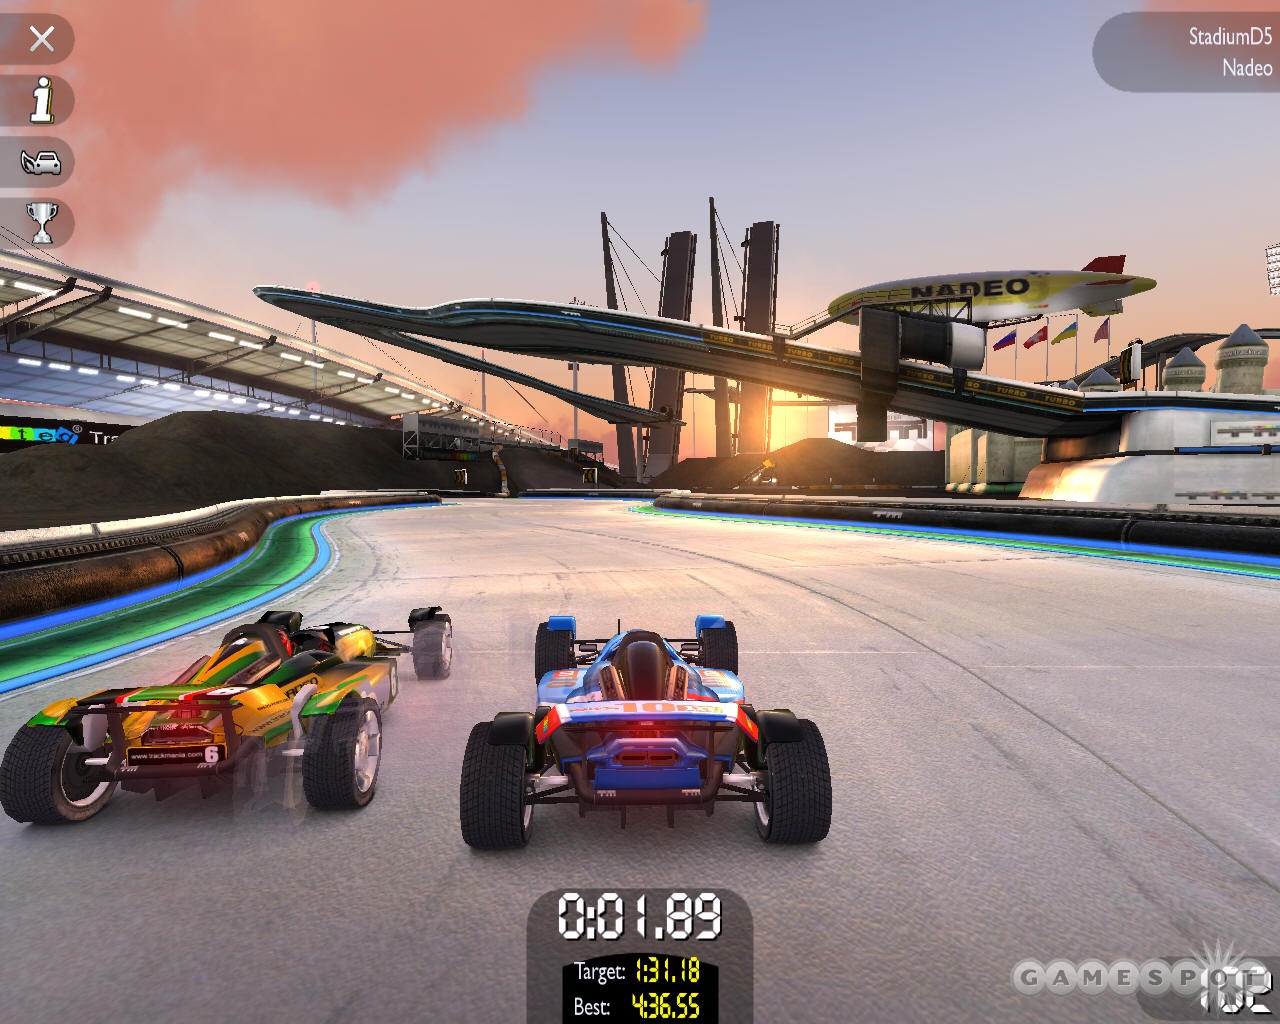 TrackMania United is even more challenging than previous TrackMania games, but the emphasis is still on fun.